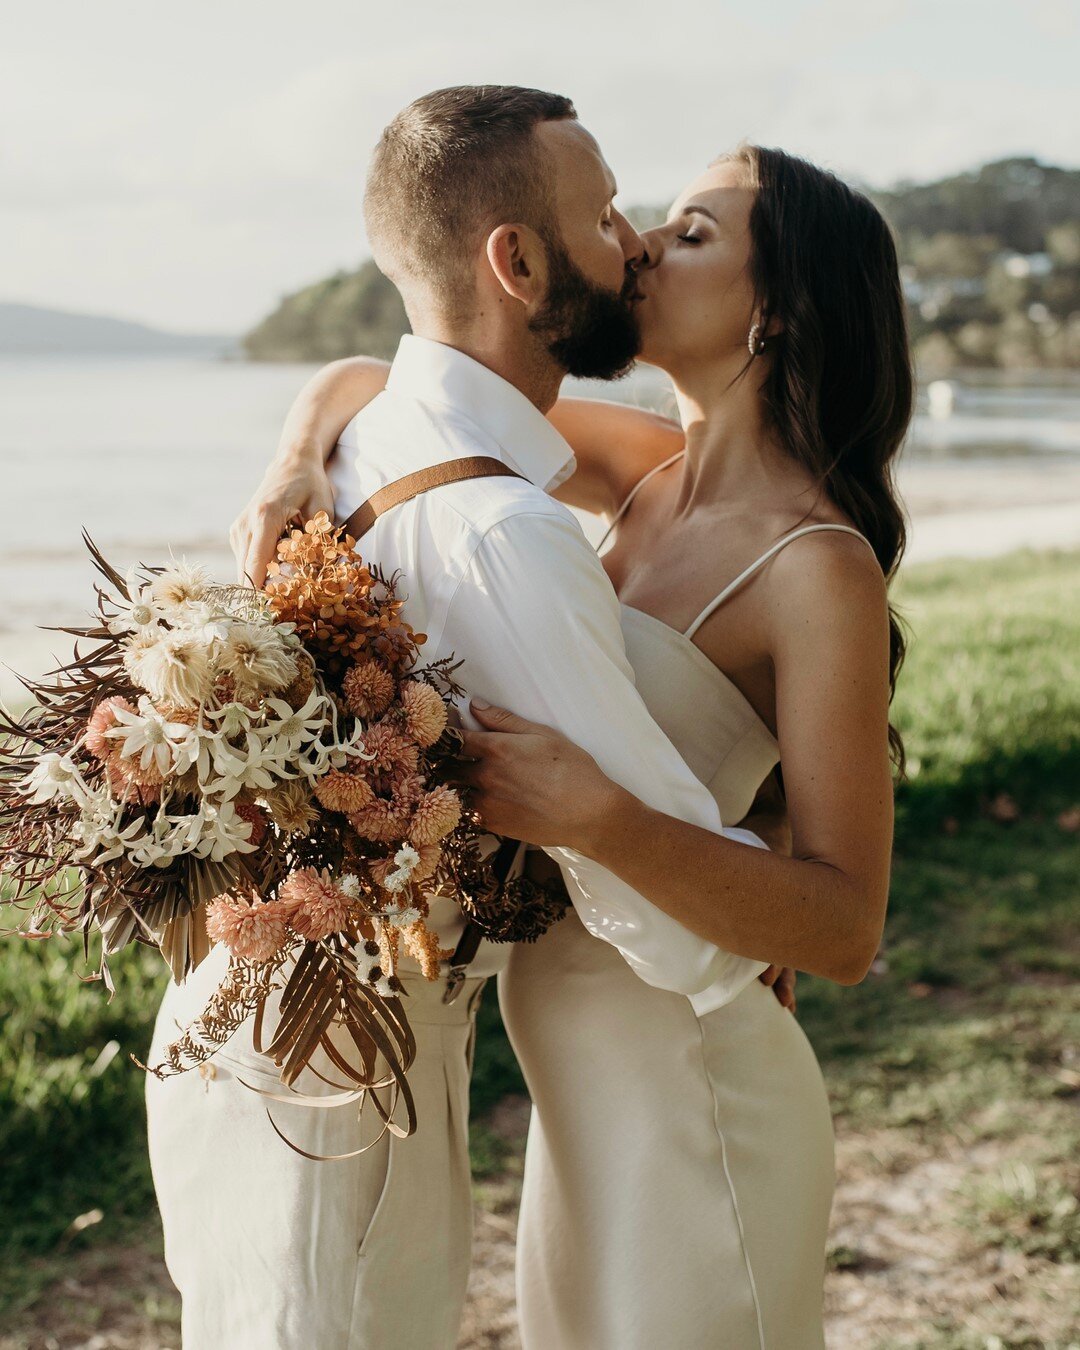 Jen &amp; Mick 🤍⠀⠀⠀⠀⠀⠀⠀⠀⠀
⠀⠀⠀⠀⠀⠀⠀⠀⠀
After having to postpone their wedding at home in the UK, Jen &amp; Mick traveled up to Port Stephens with a group of their friends to elope! The rented an amazing beach house that backs onto the water - the perfe